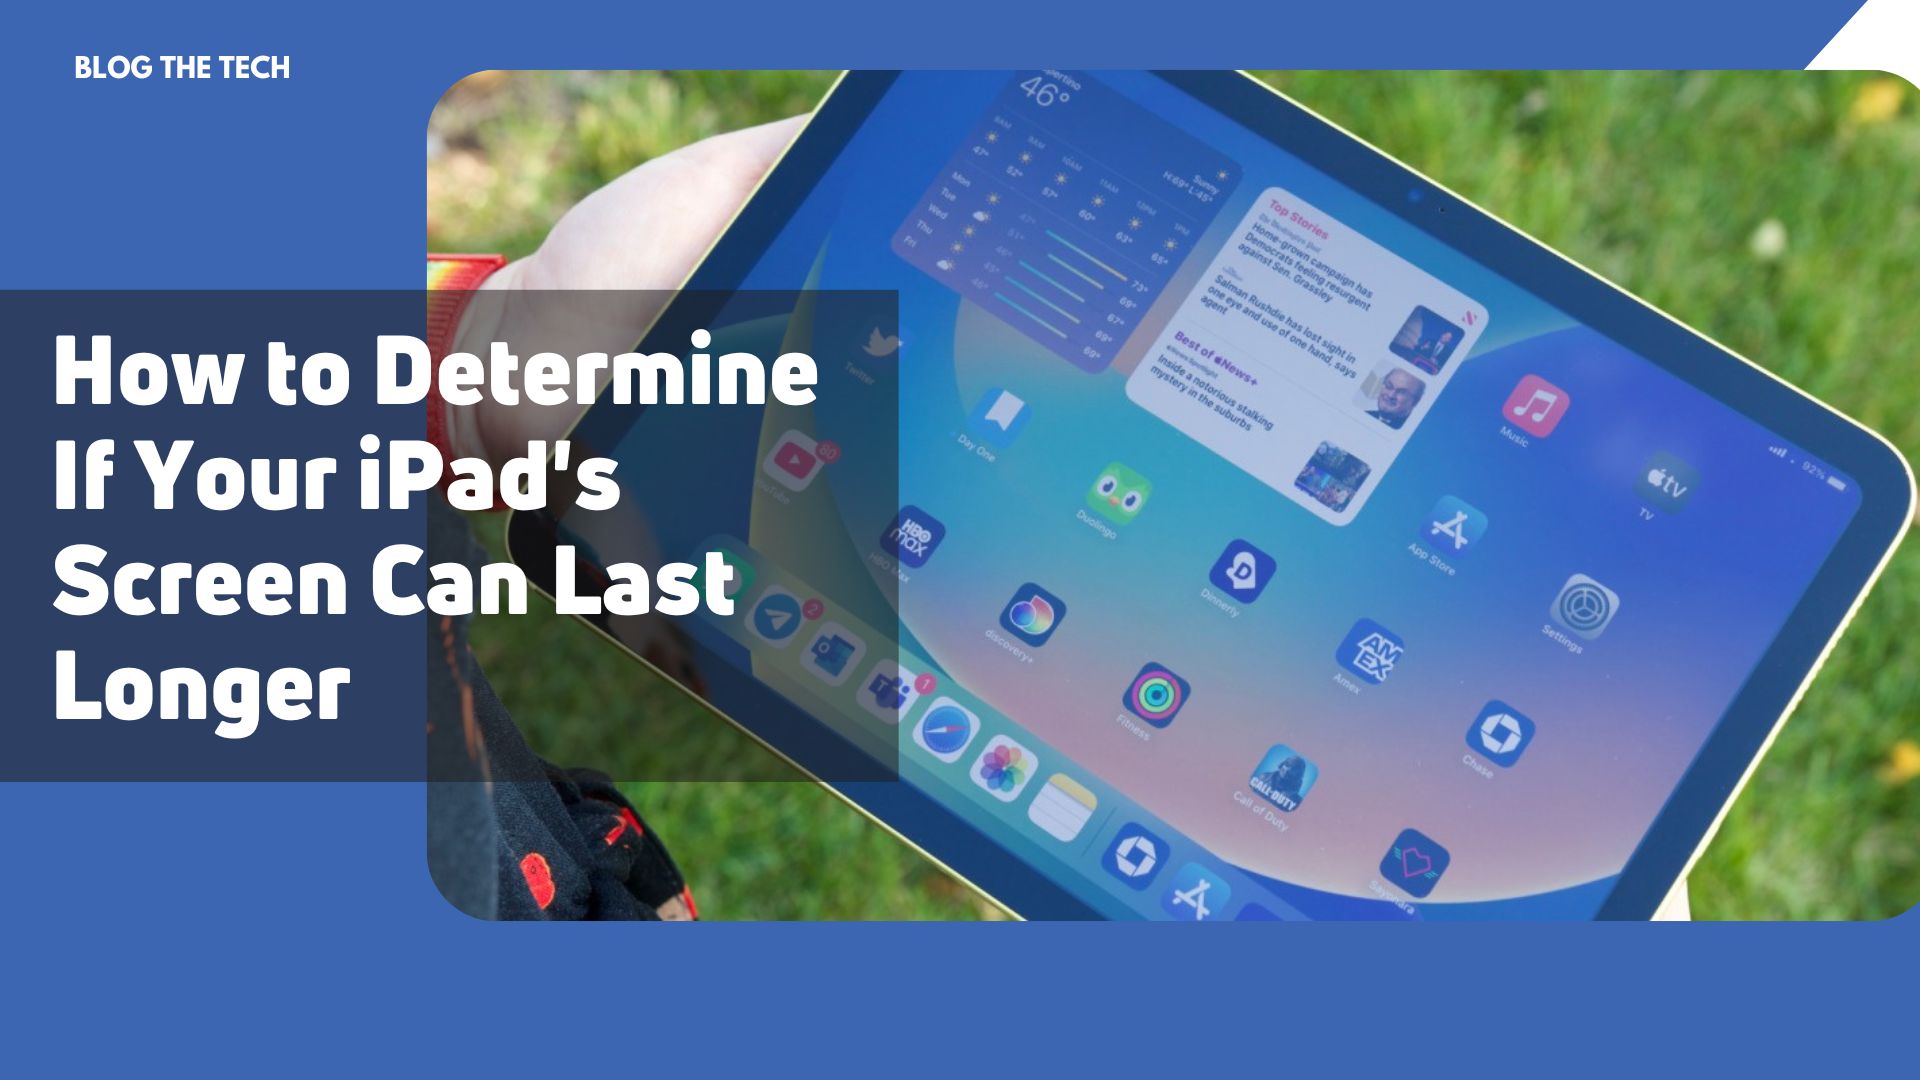 How to Determine If Your iPad's Screen Can Last Longer